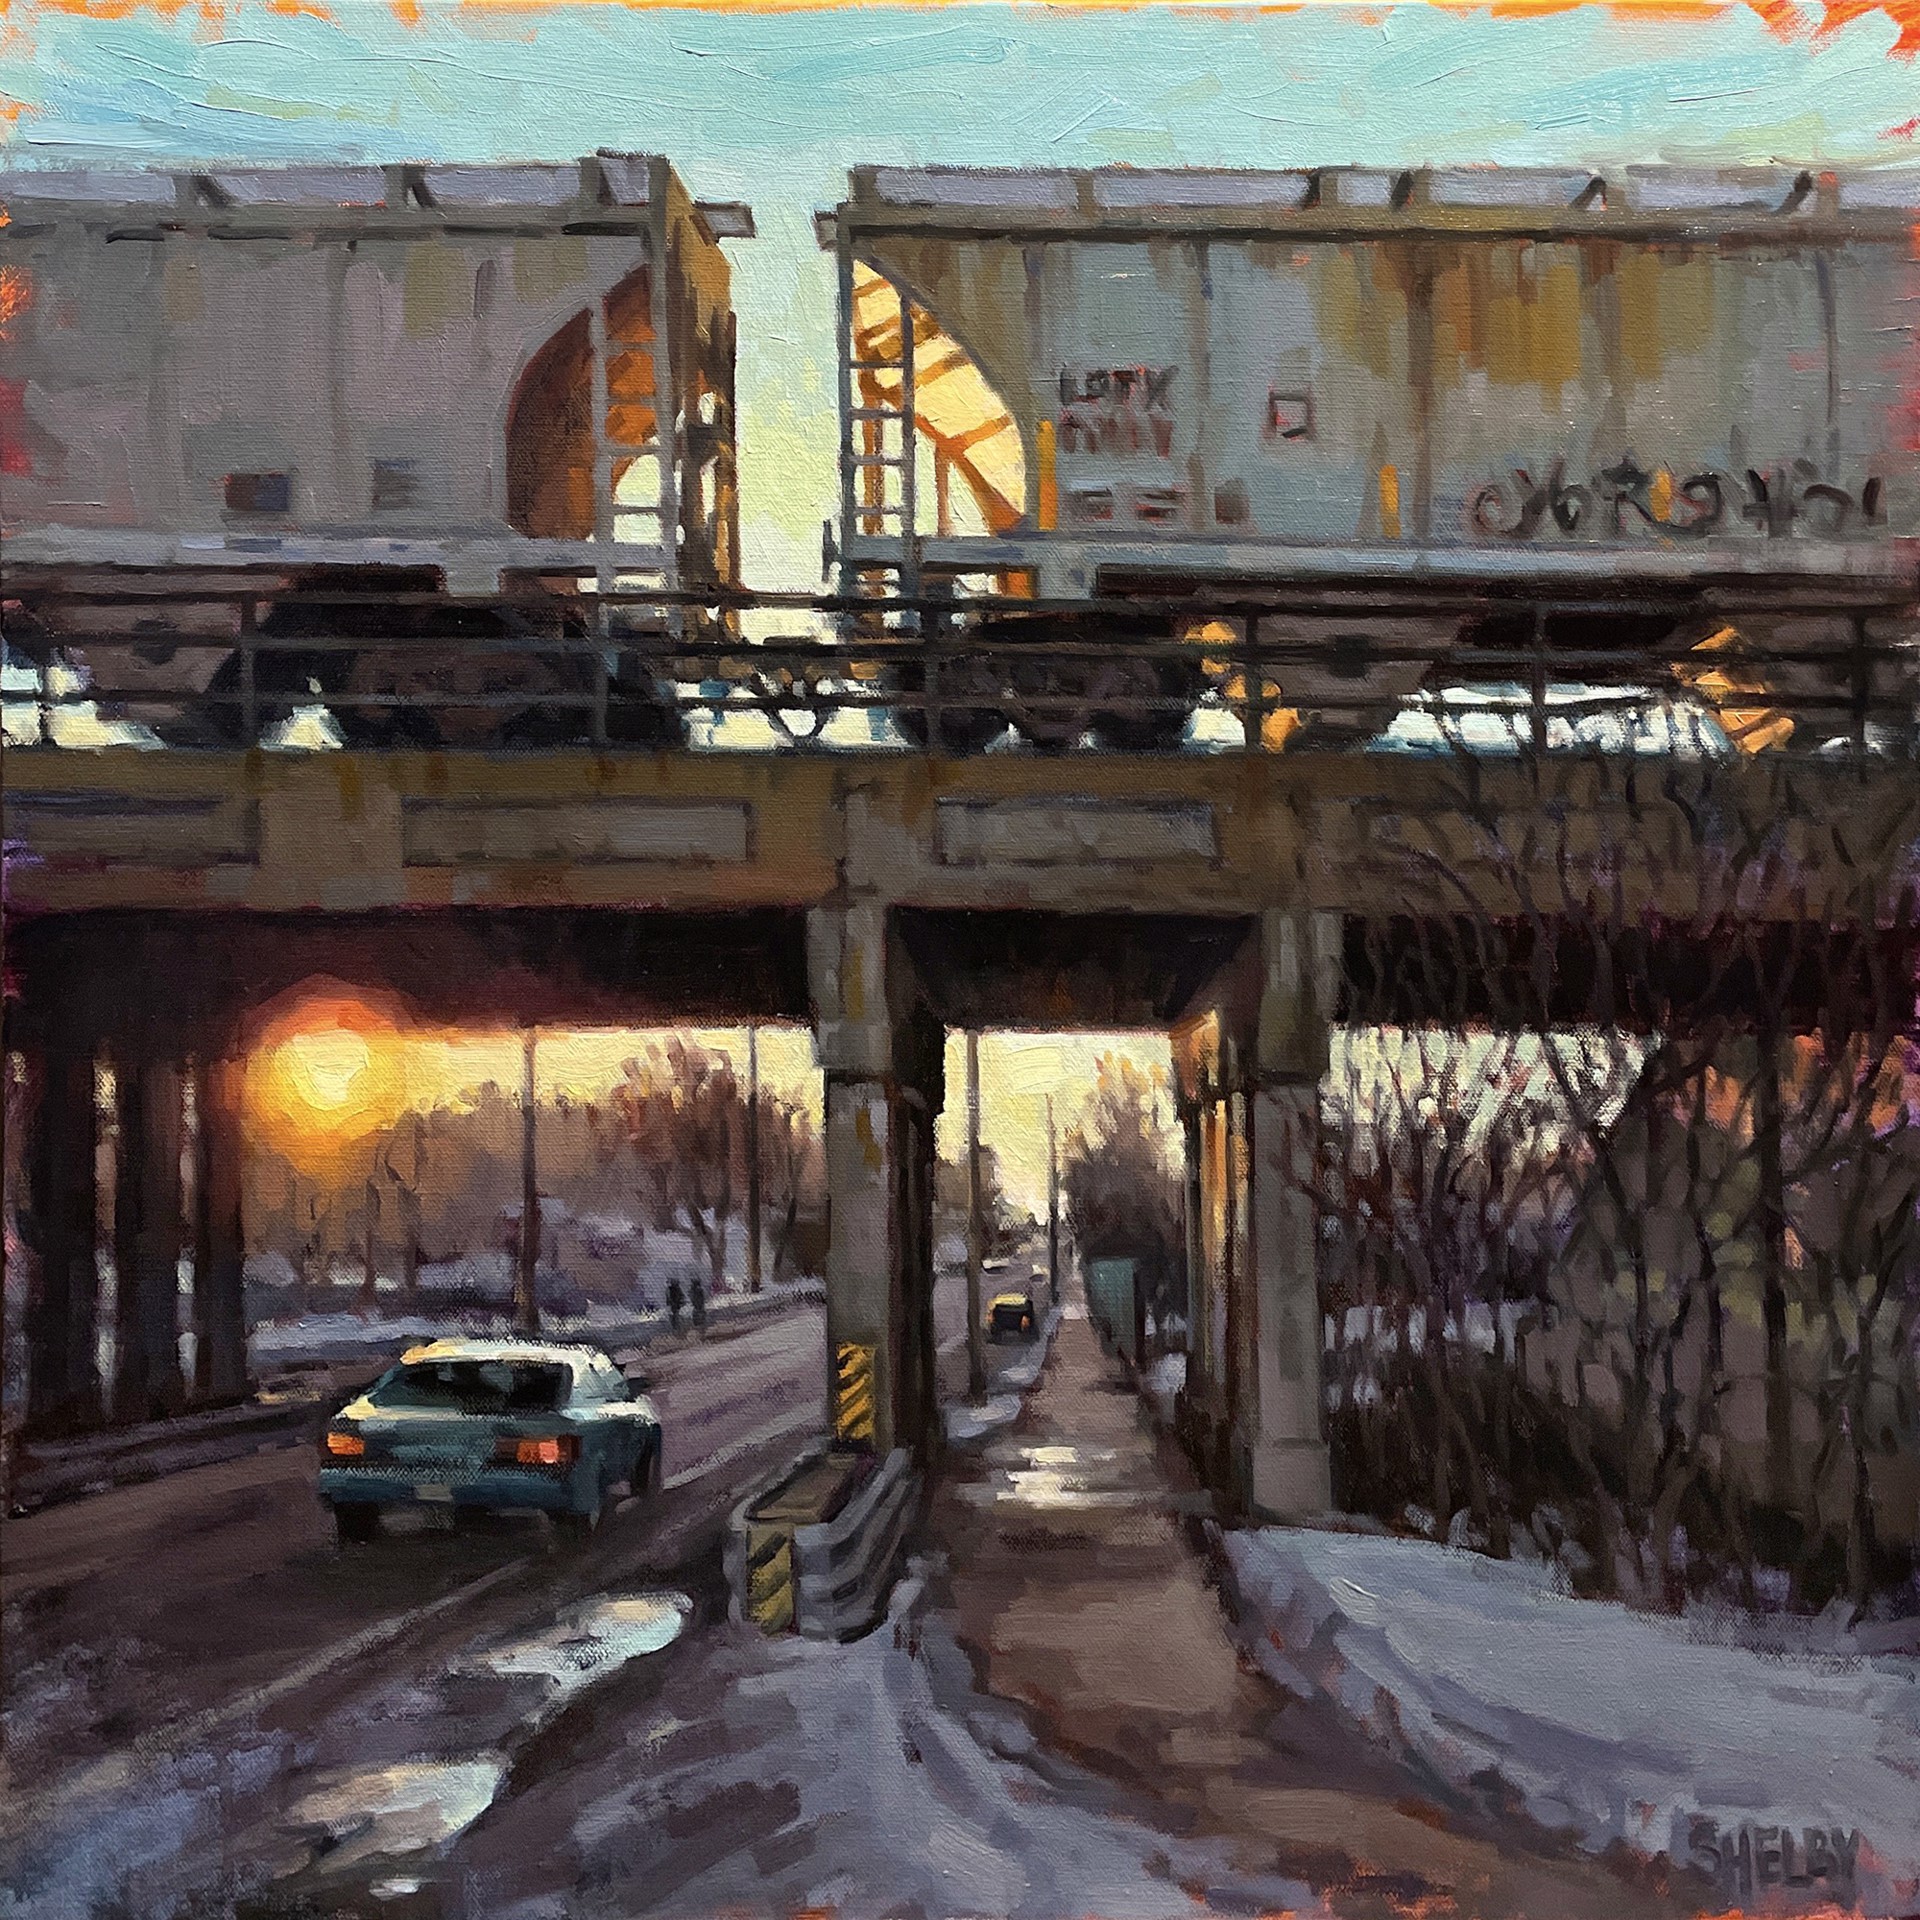 Sunset Under the Tracks by Shelby Keefe